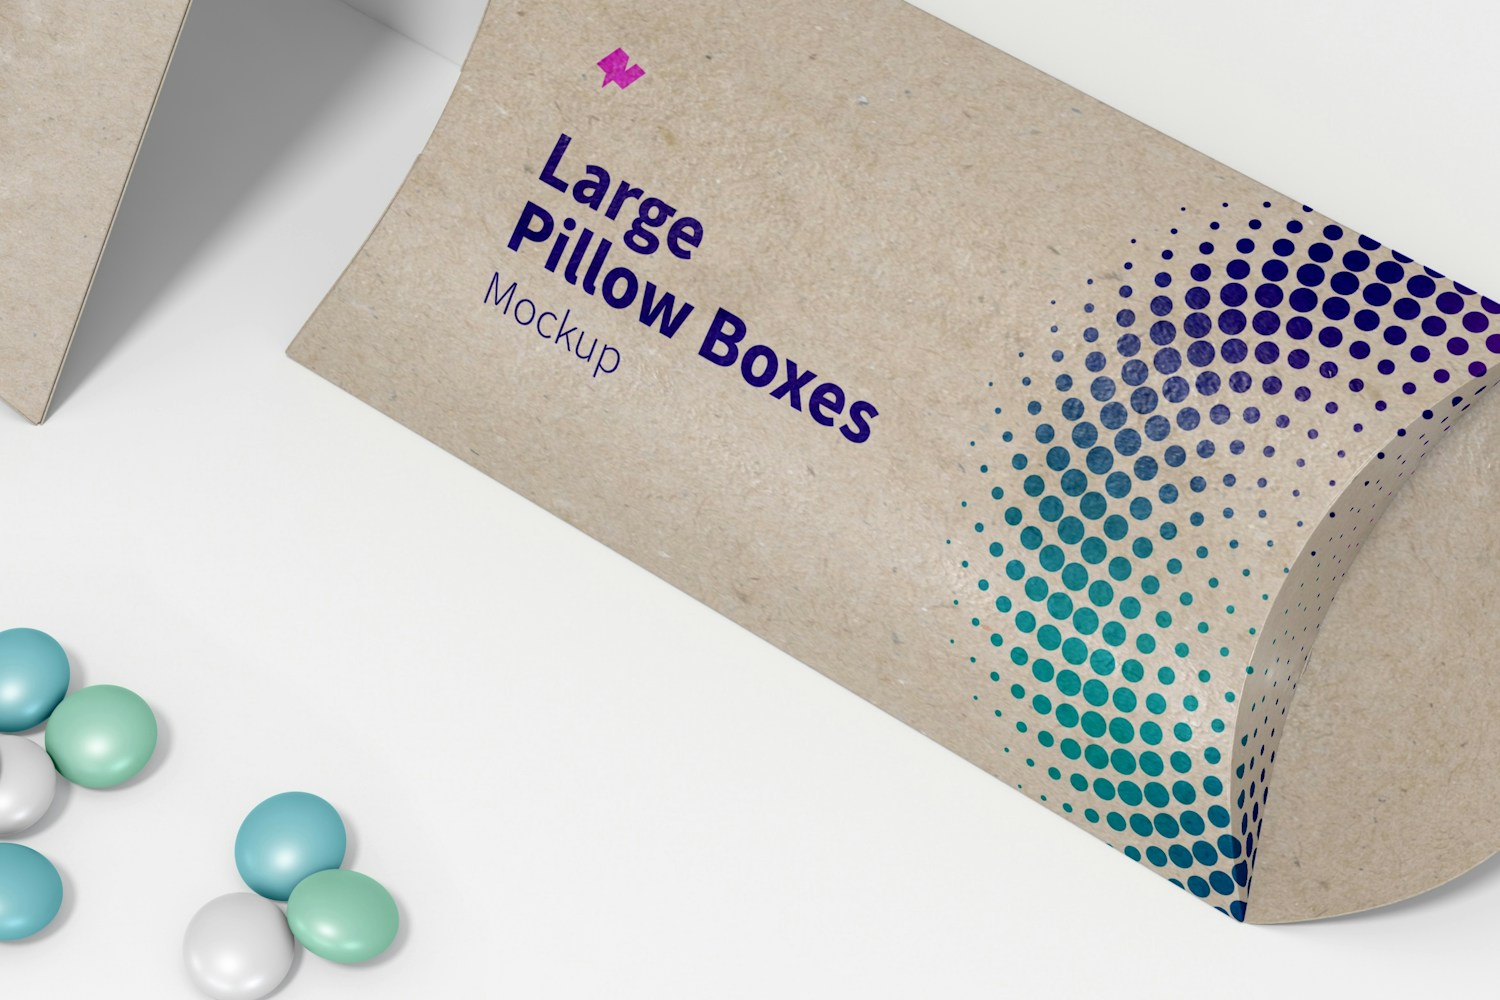 Large Pillow Boxes Set Mockup, Perspective View